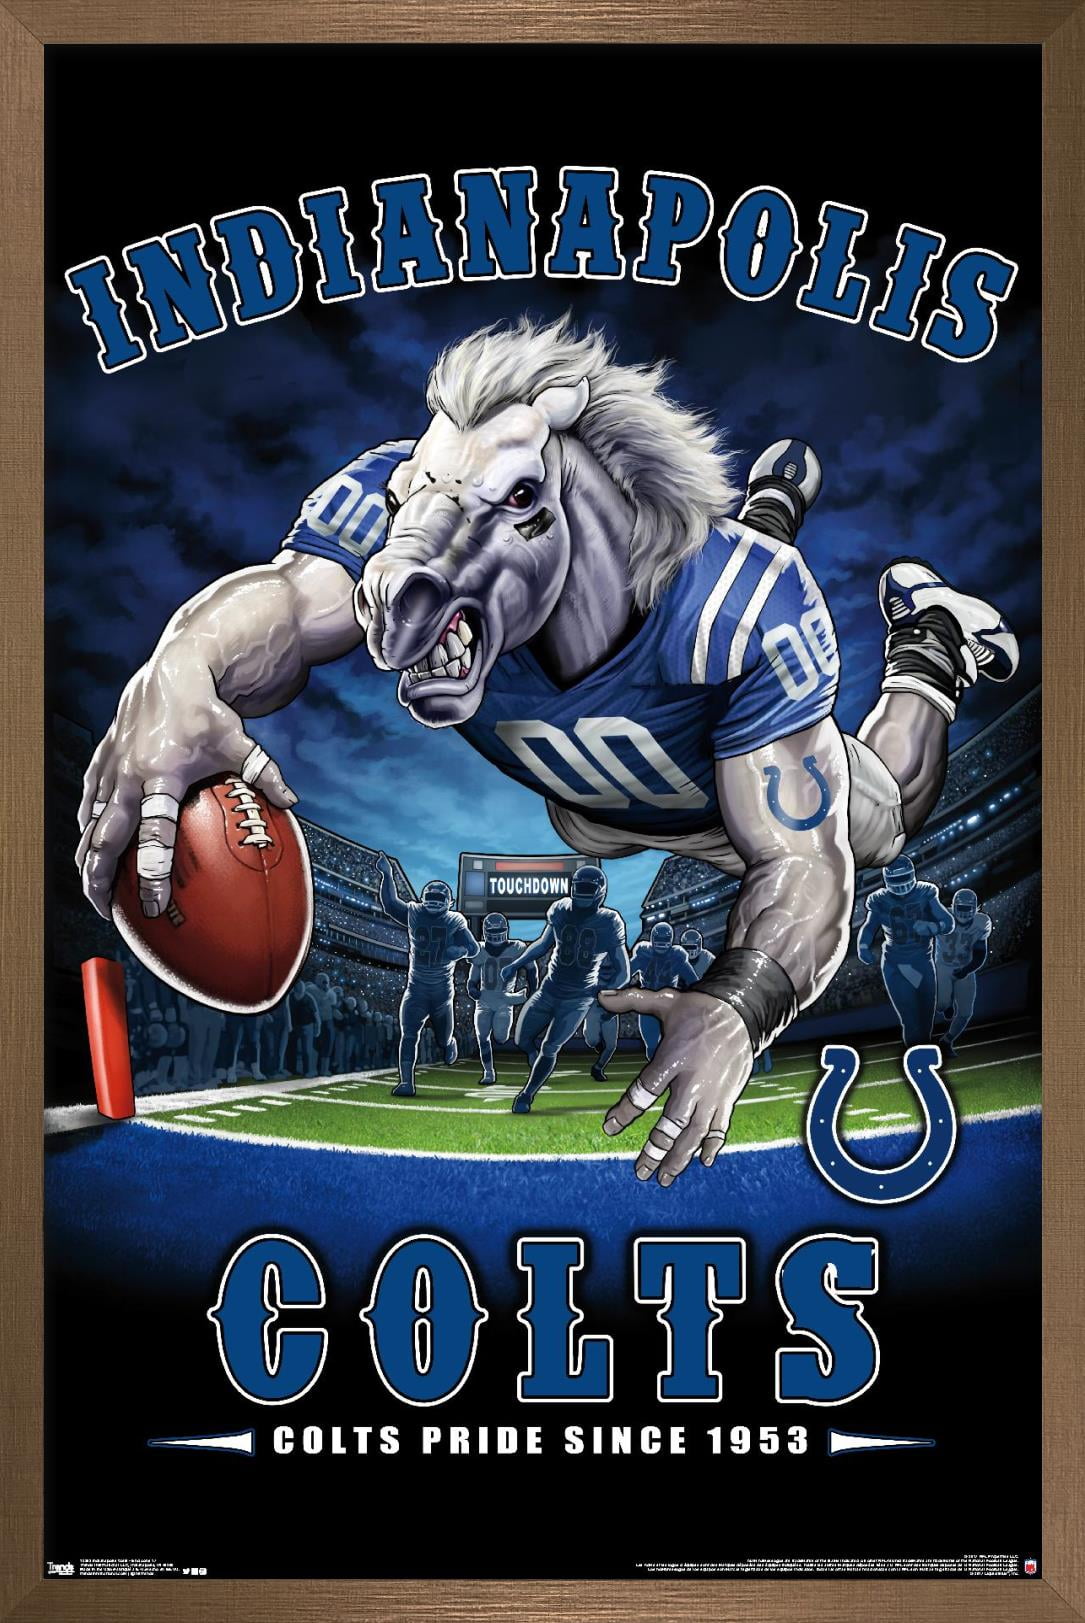 Forever Collectibles NFL Womens Indianapolis Colts Gradient 2.0